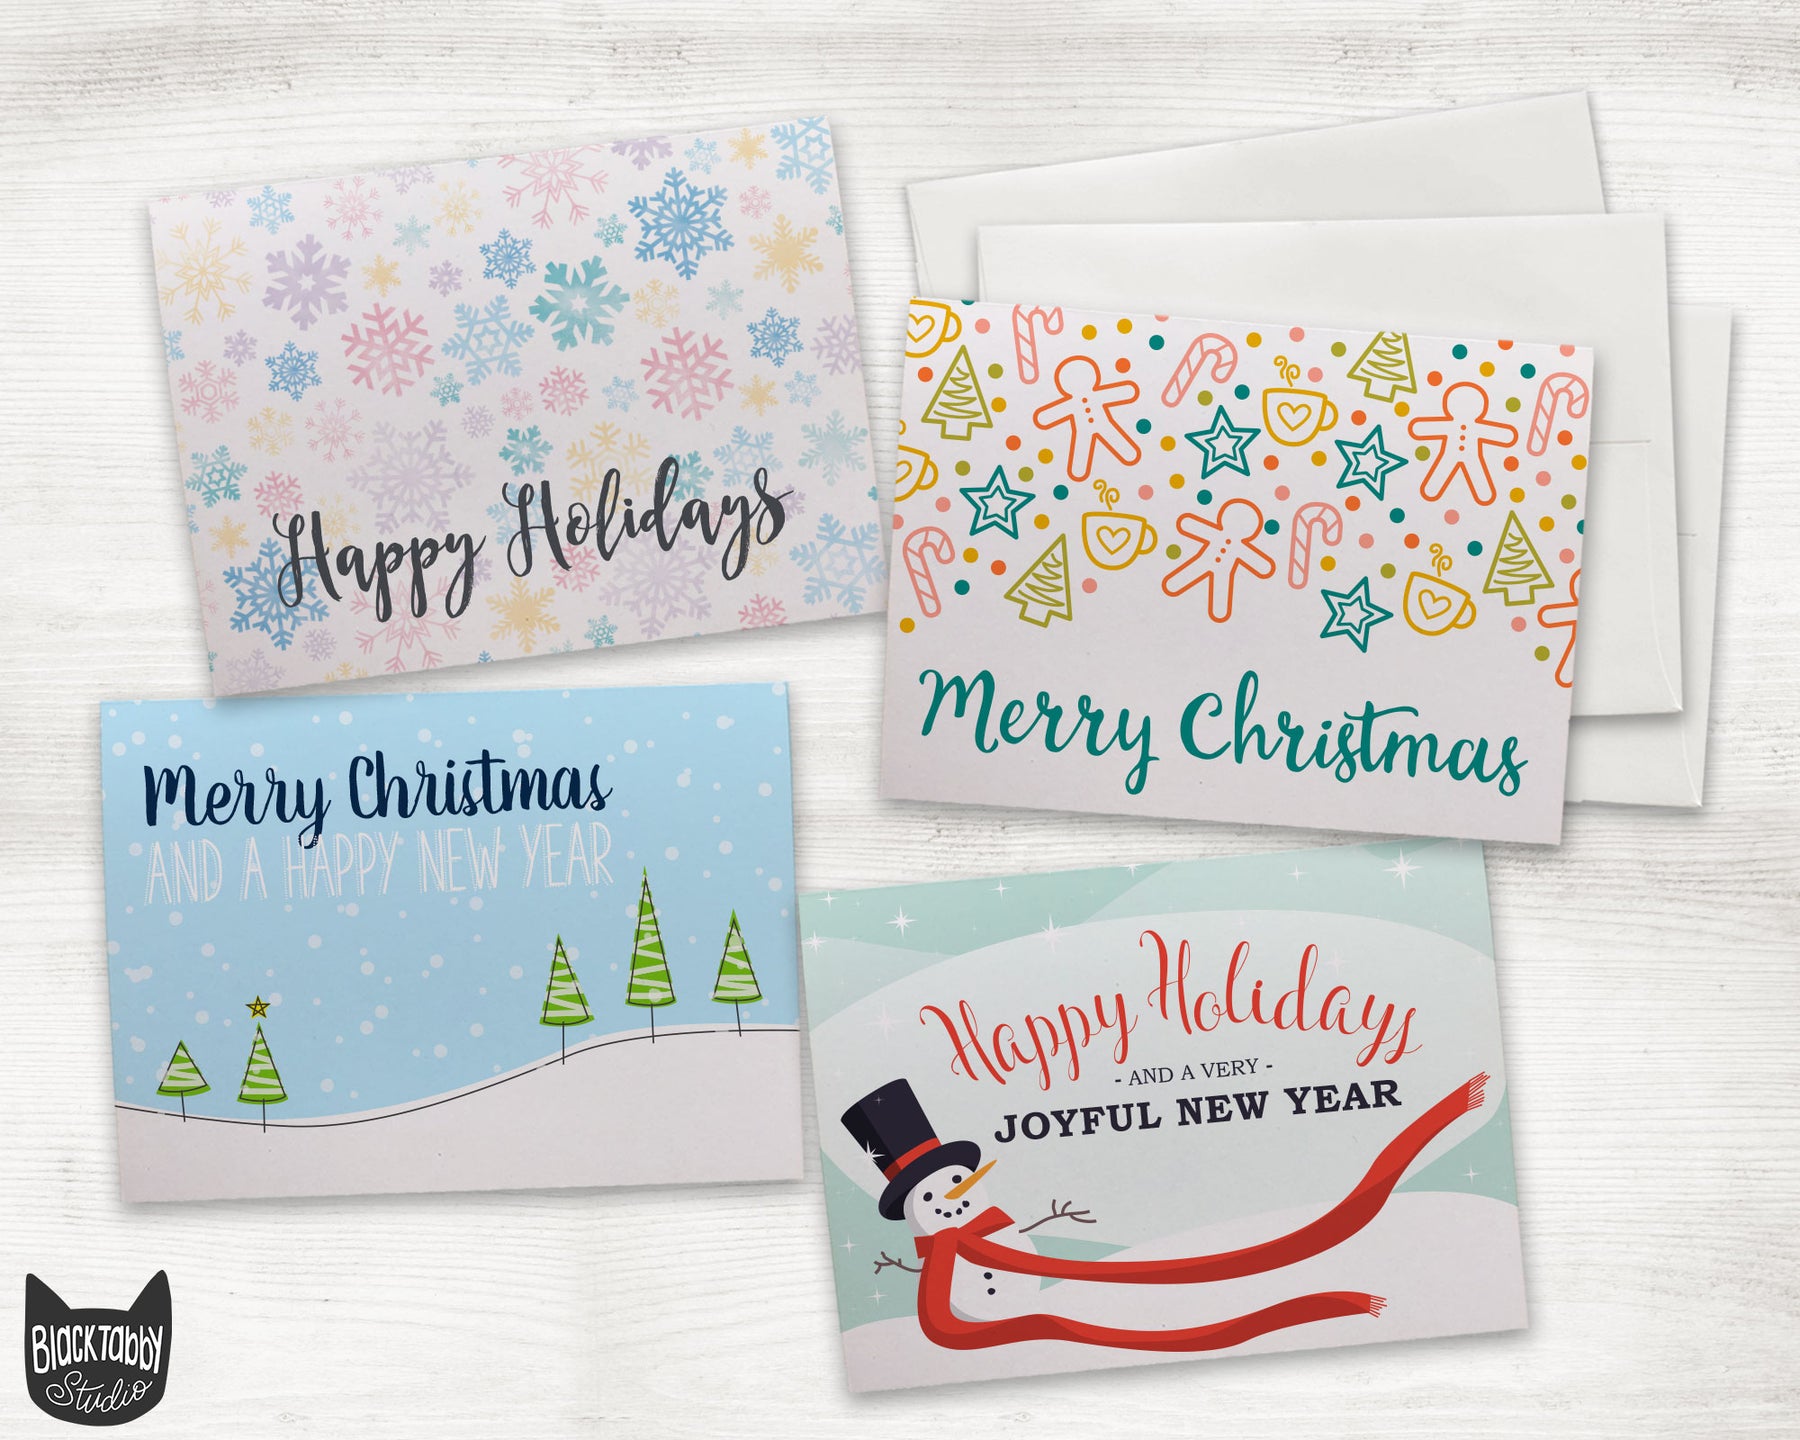 Greeting Cards, Thank You Cards, Invites, & Gifts | Black Tabby Studio